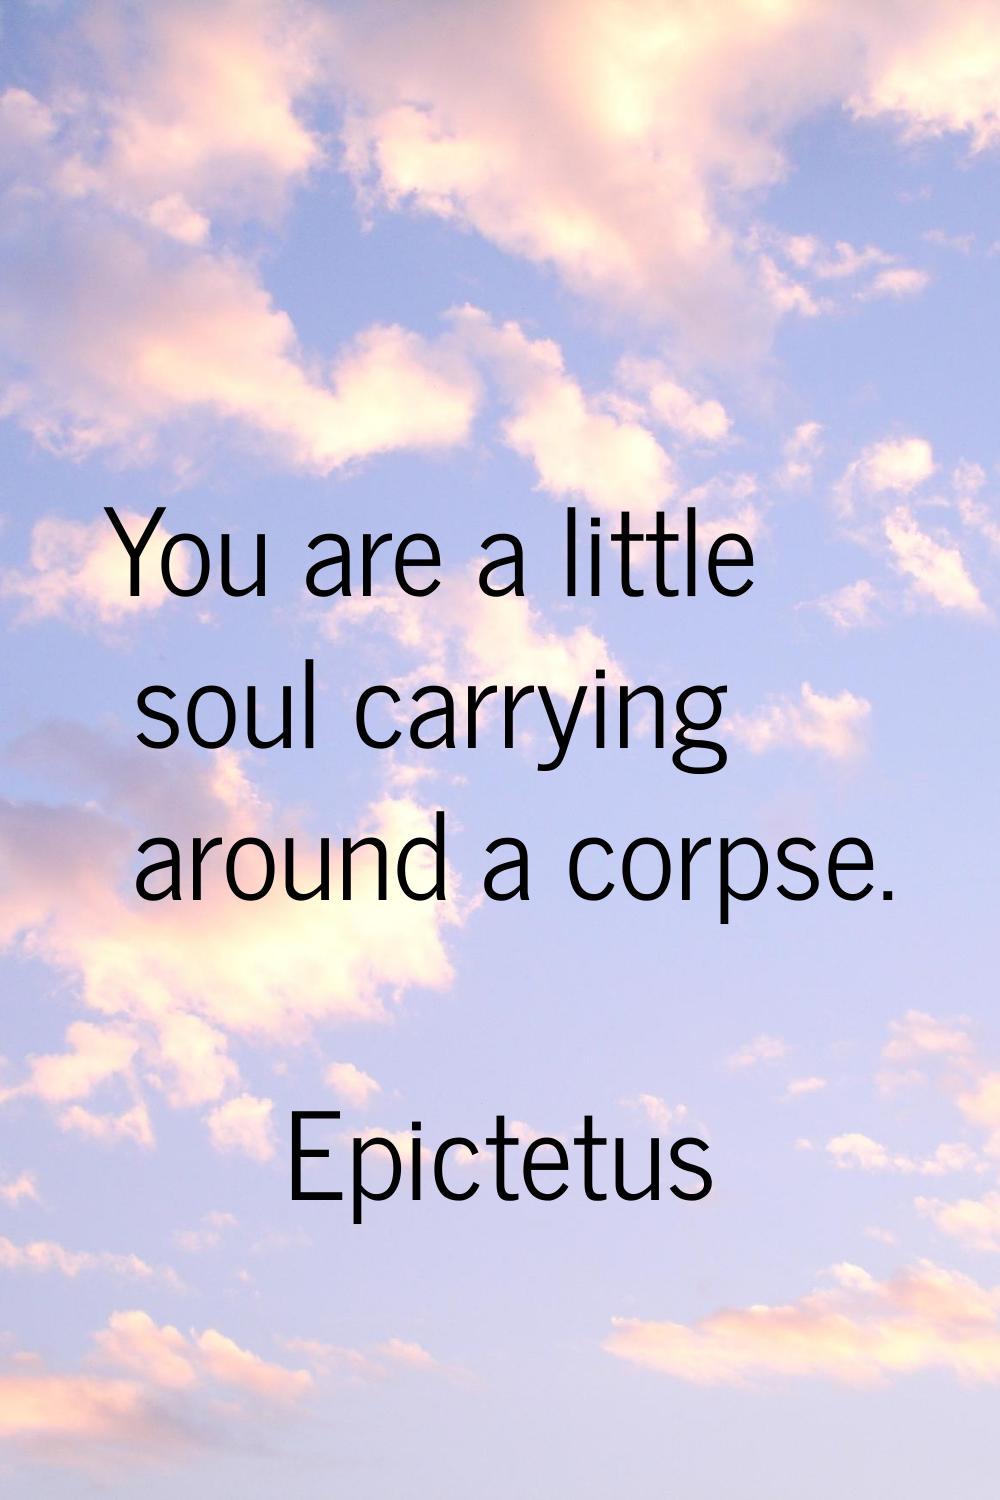 You are a little soul carrying around a corpse.